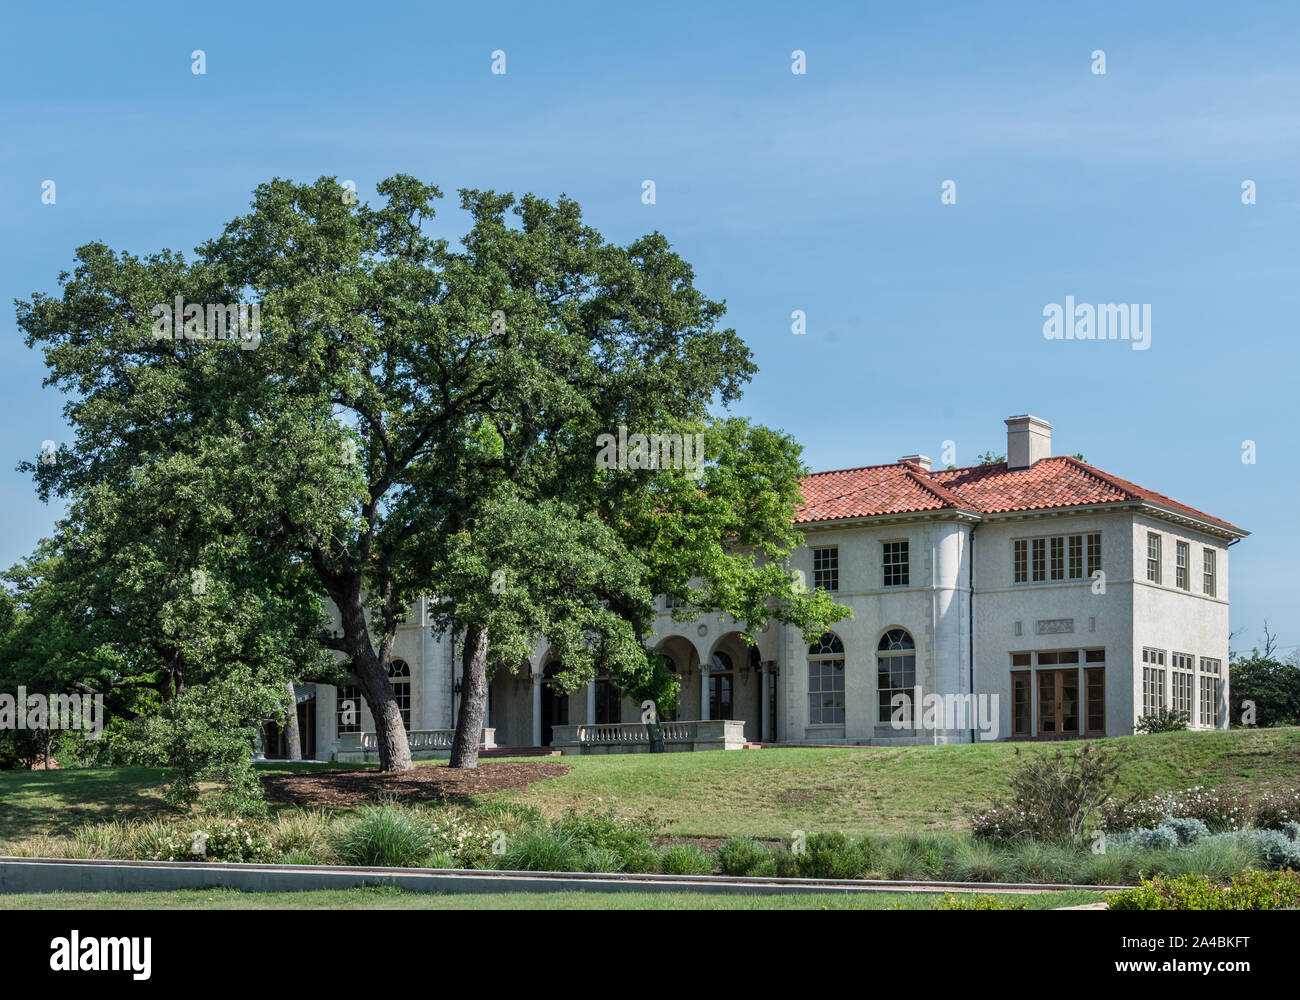 The Commodore Perry Estate home (but NOT that of THE Commodore Oliver Hazard Perry, hero of the Battle of Lake Erie), in Austin, Texas Stock Photo